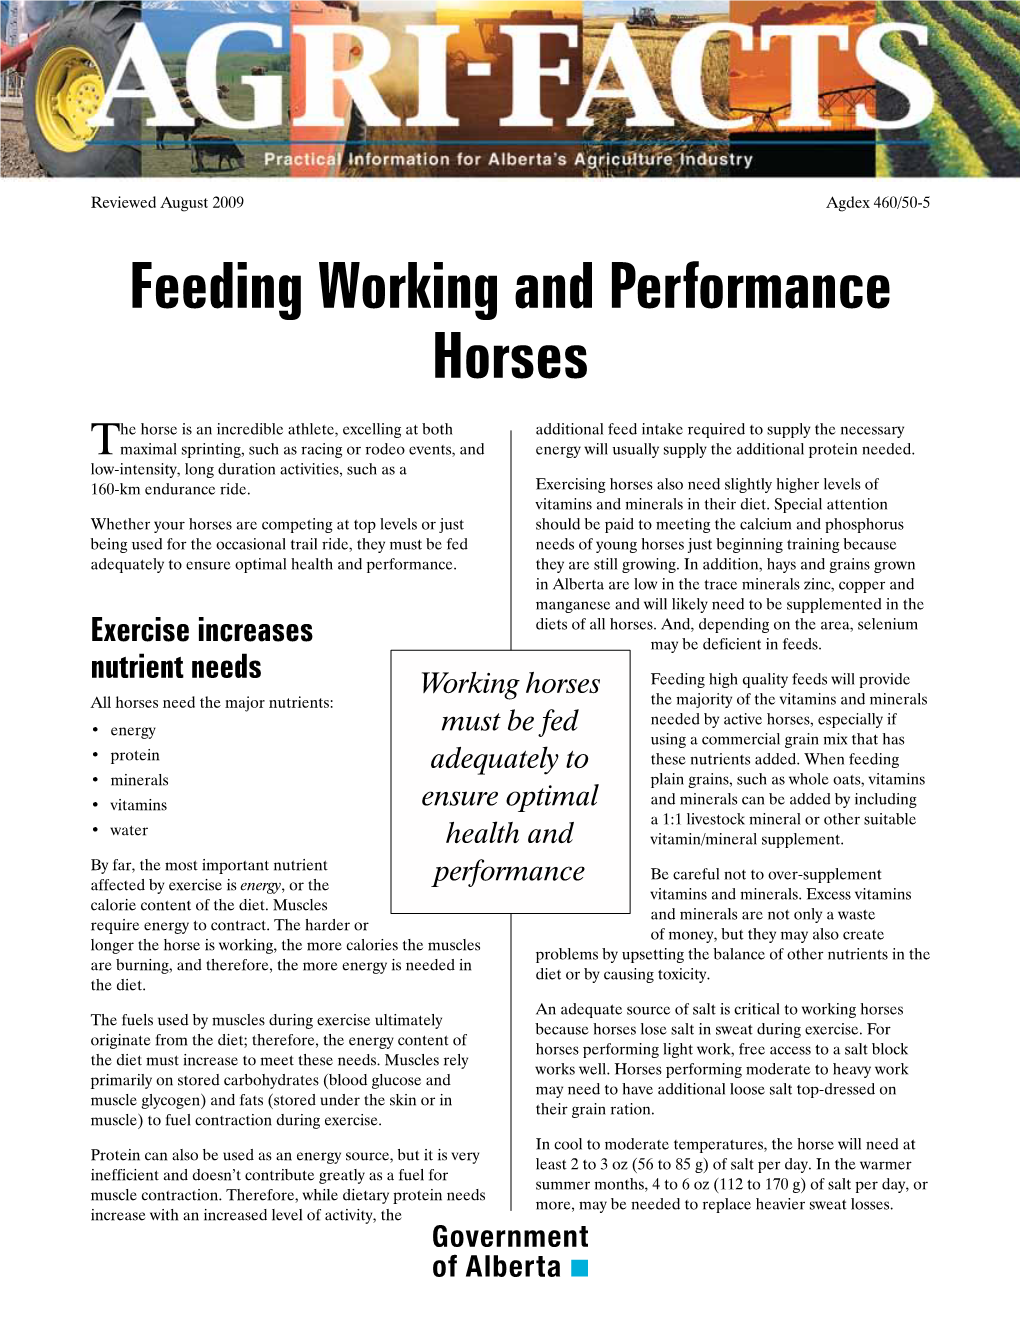 Feeding Working and Performance Horses